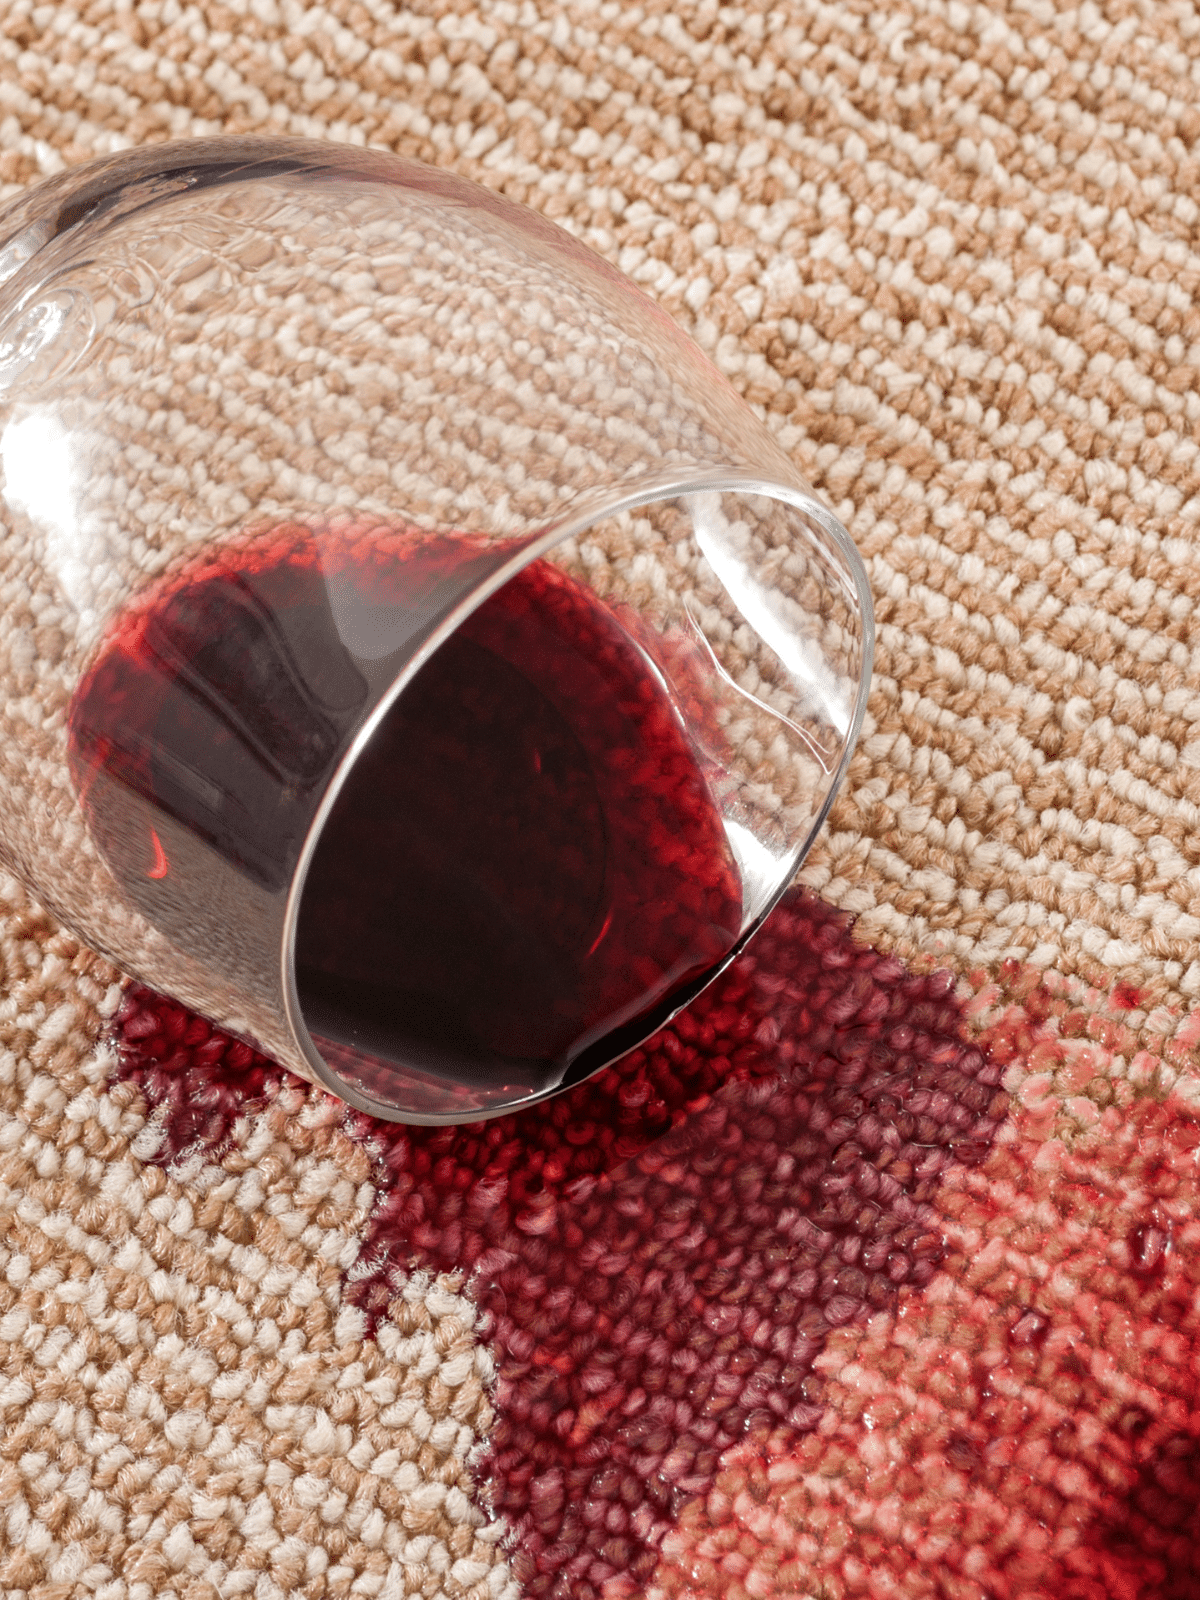 A spilled glass of red wine on a carpet.